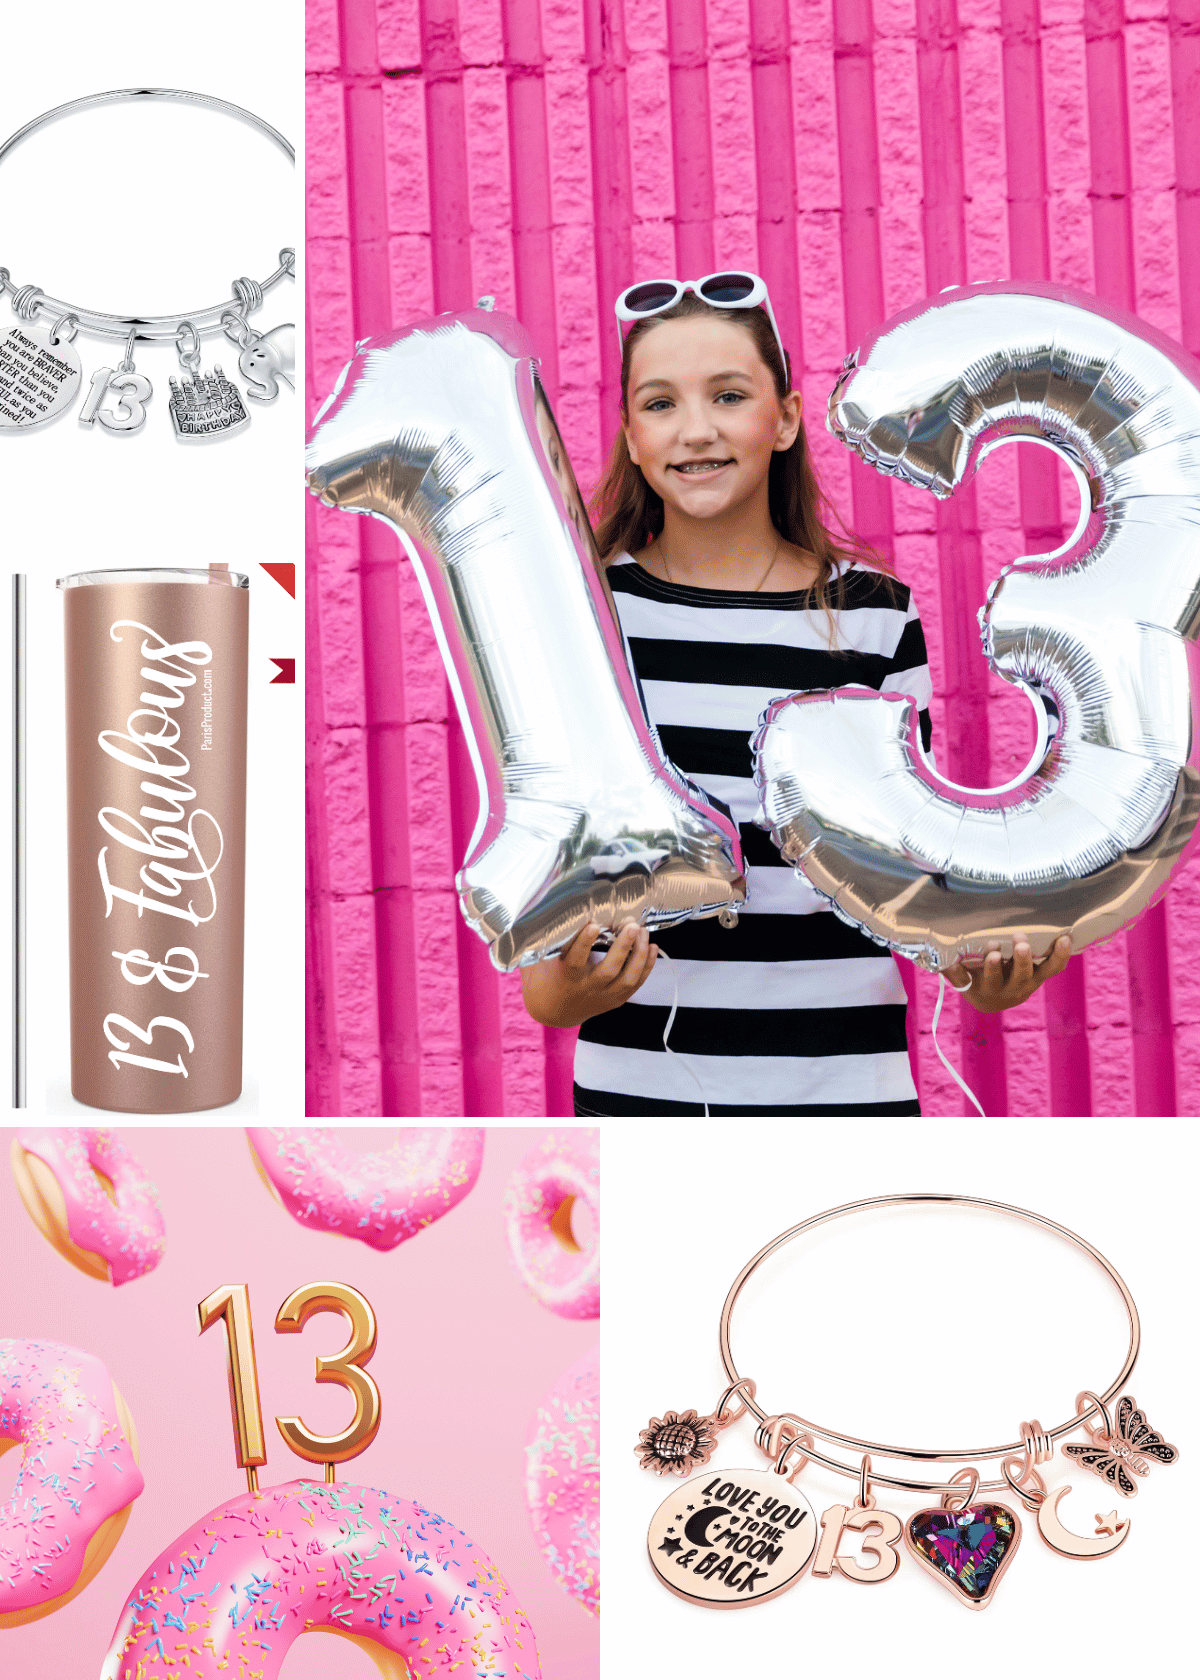 The Best Birthday Gifts For 13YearOld Girls